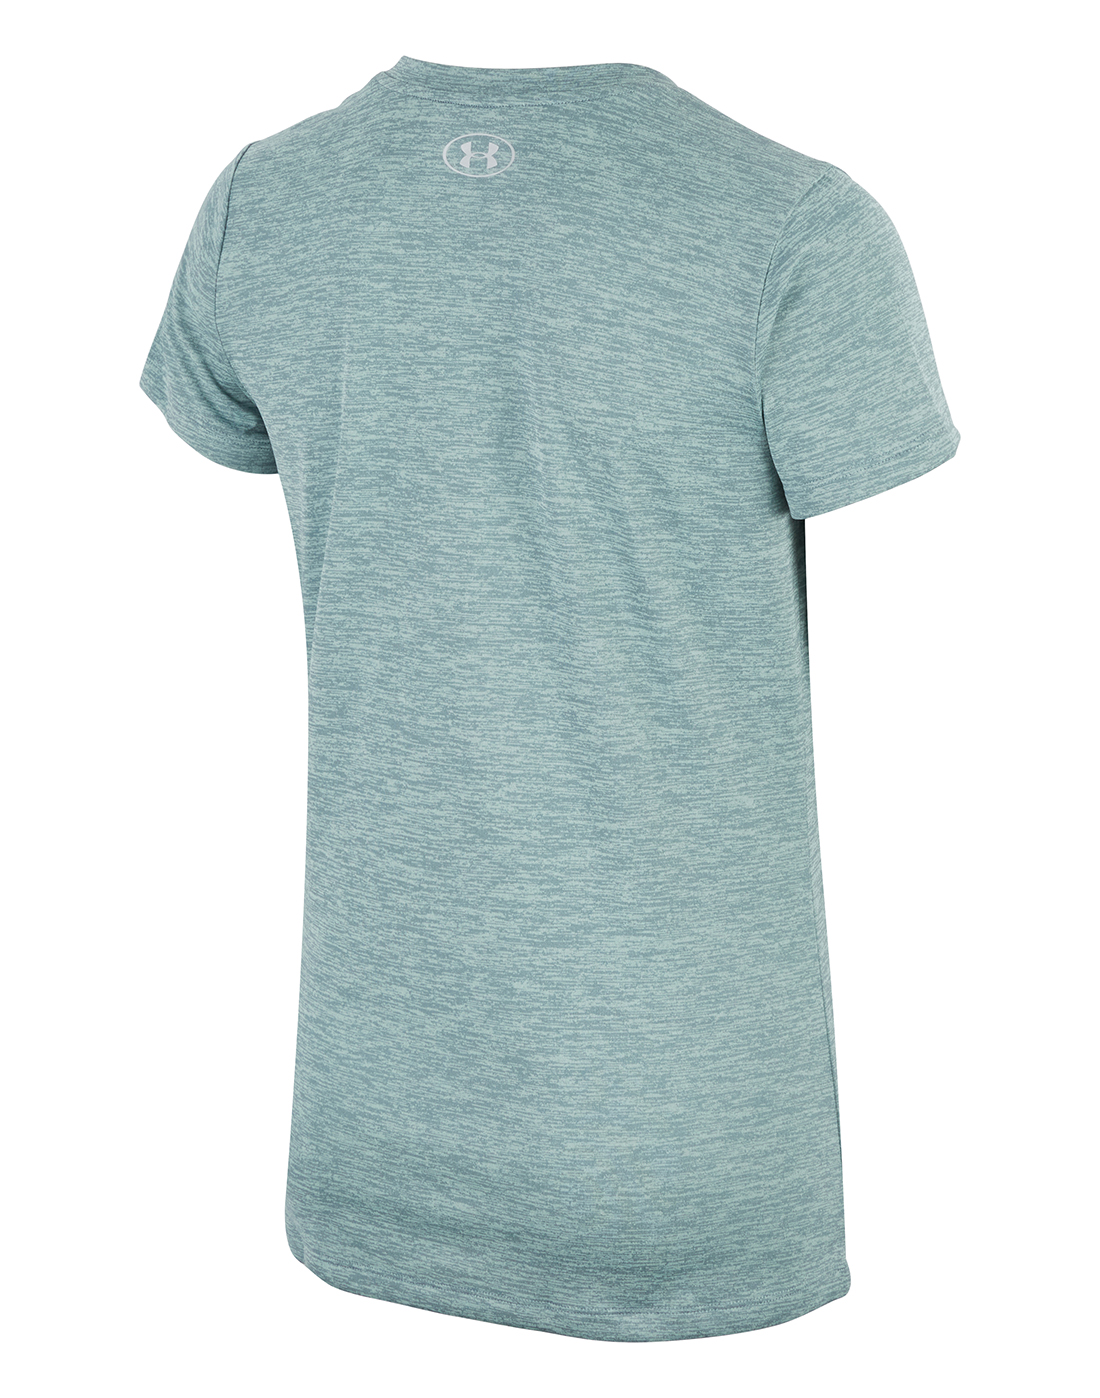 Under Armour Womens Tech T-shirt - Grey | Life Style Sports IE